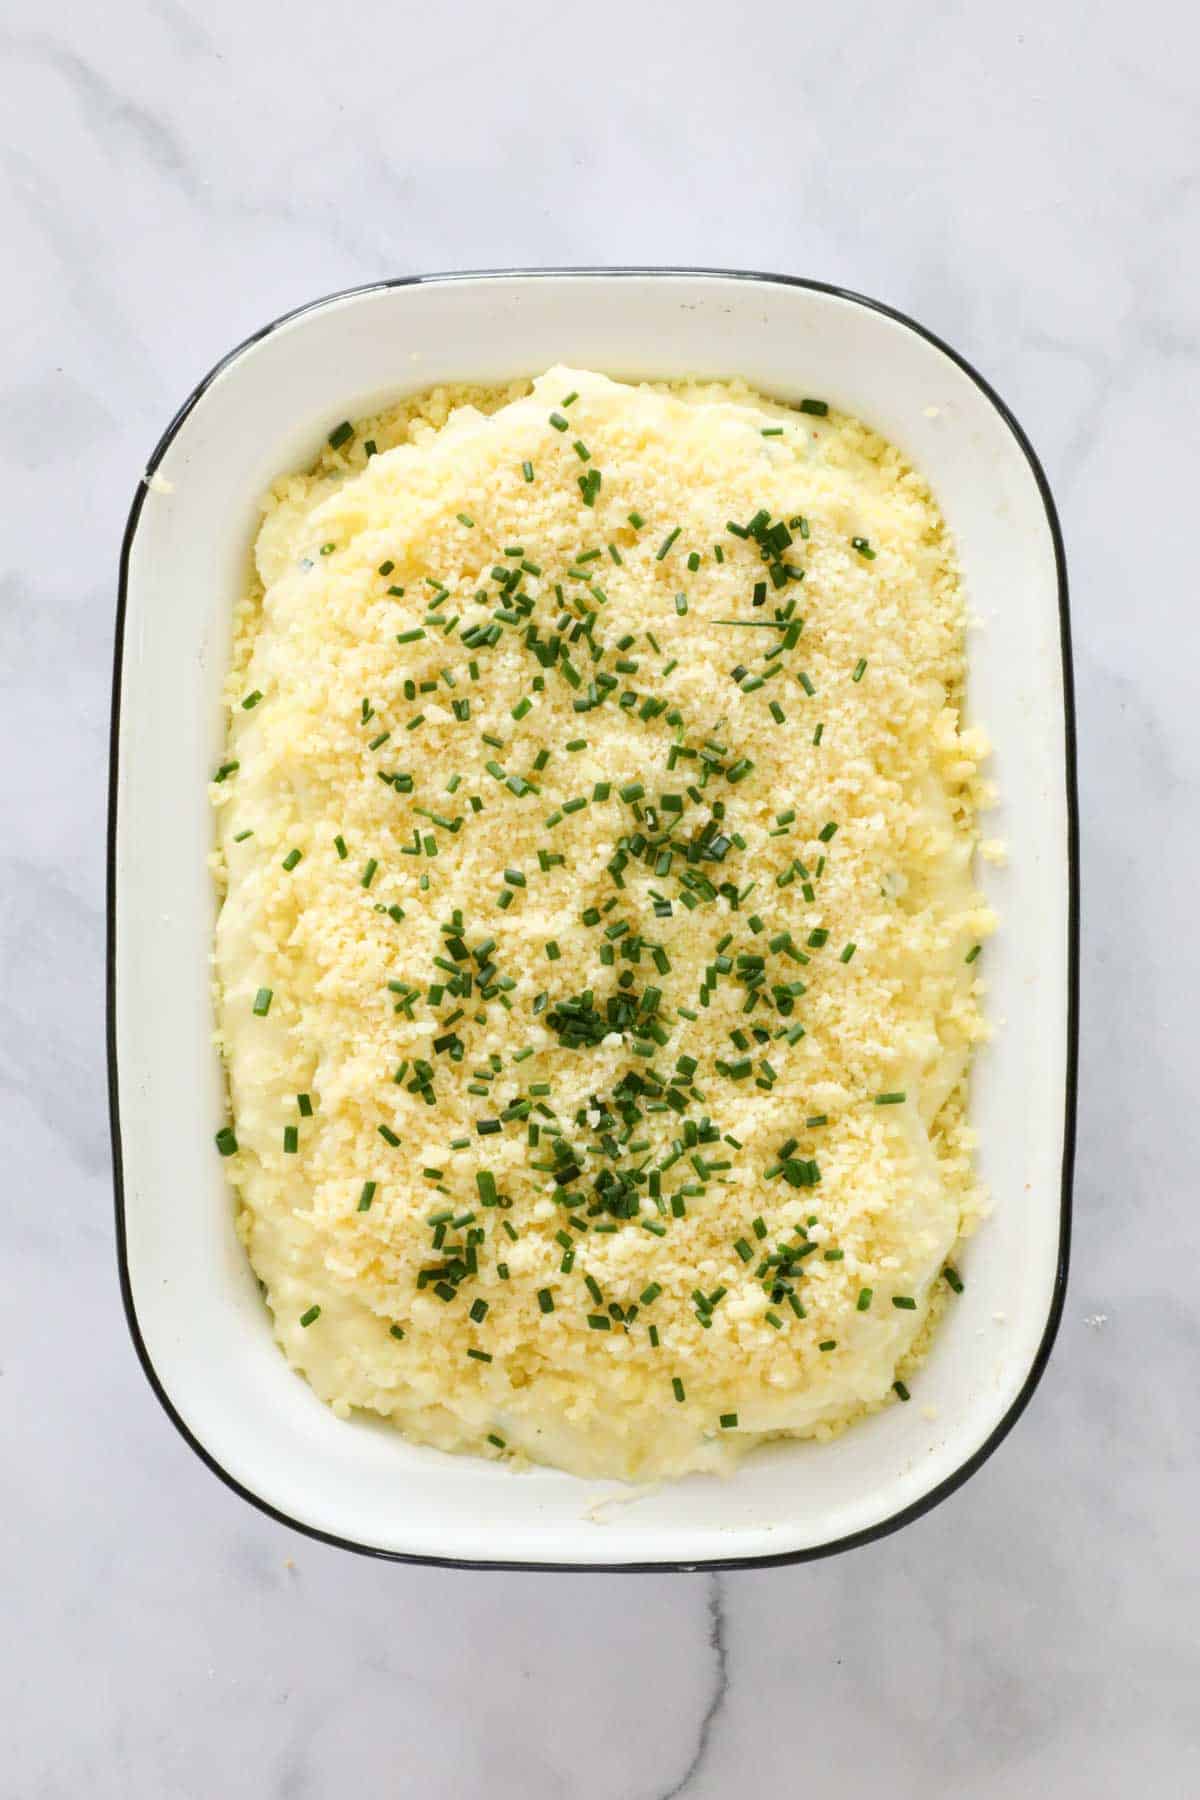 Cheese and chives sprinkled over baking dish.